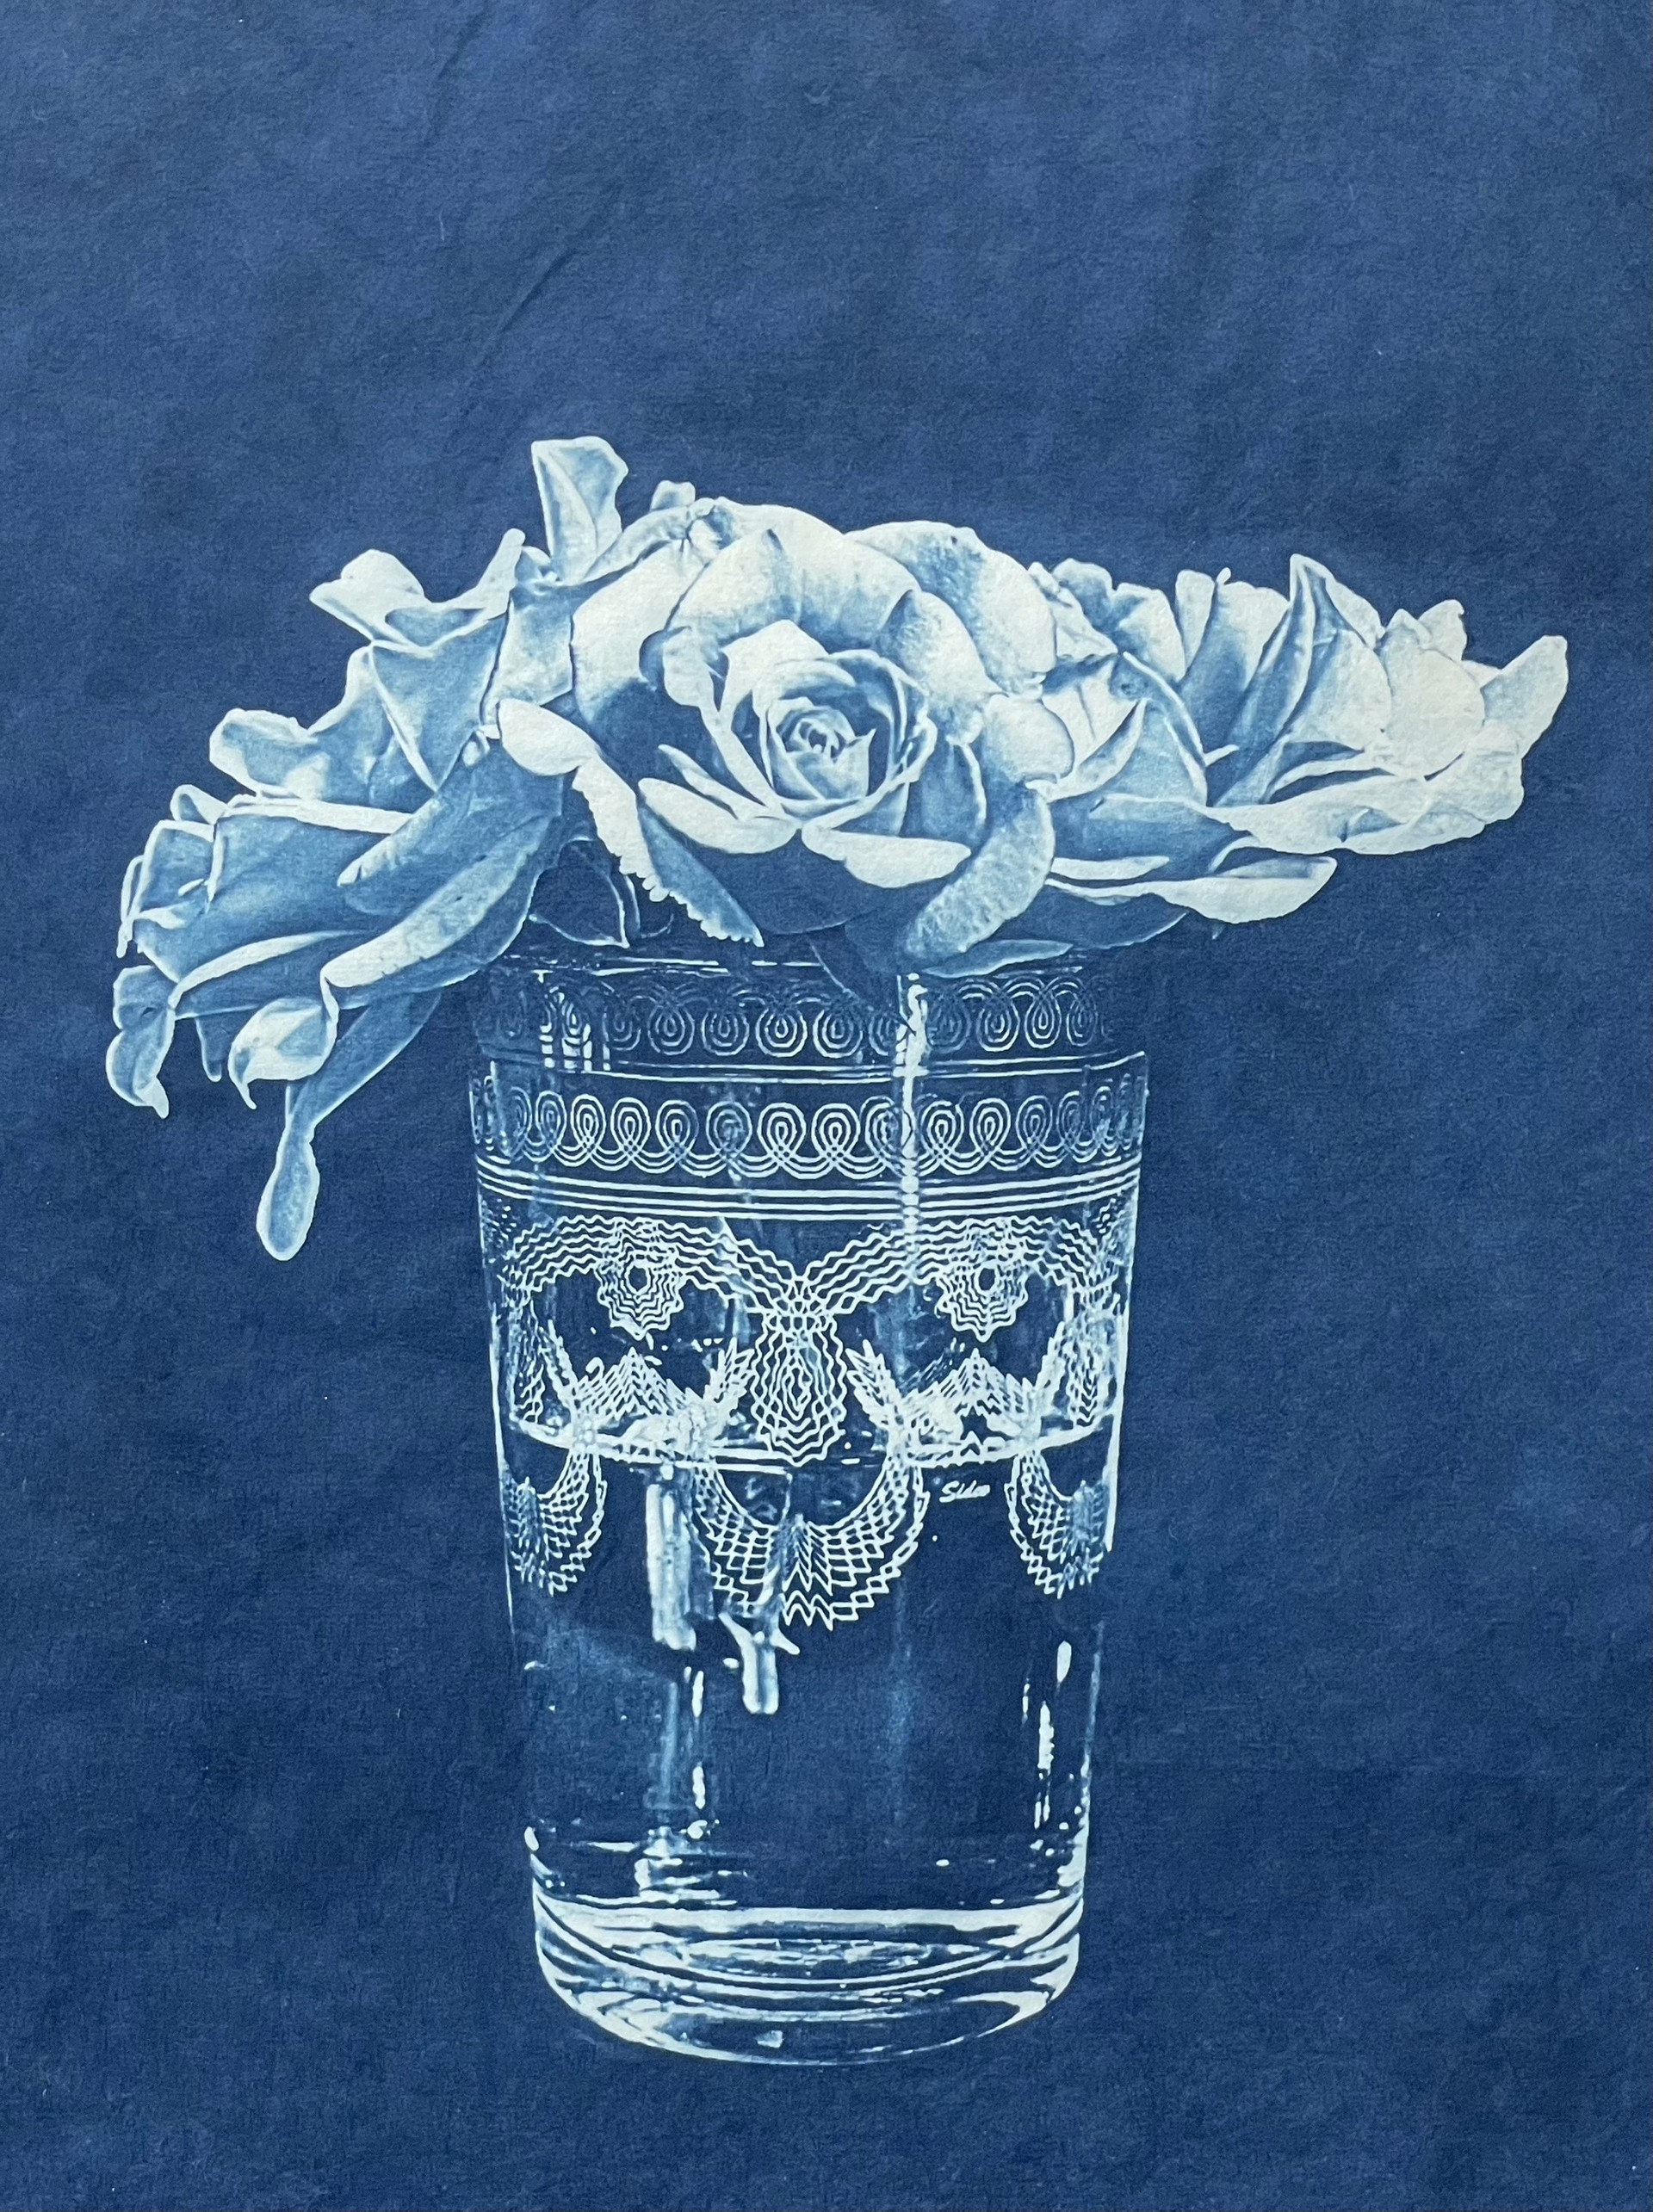 French Glass & Roses by Claudia Hollister